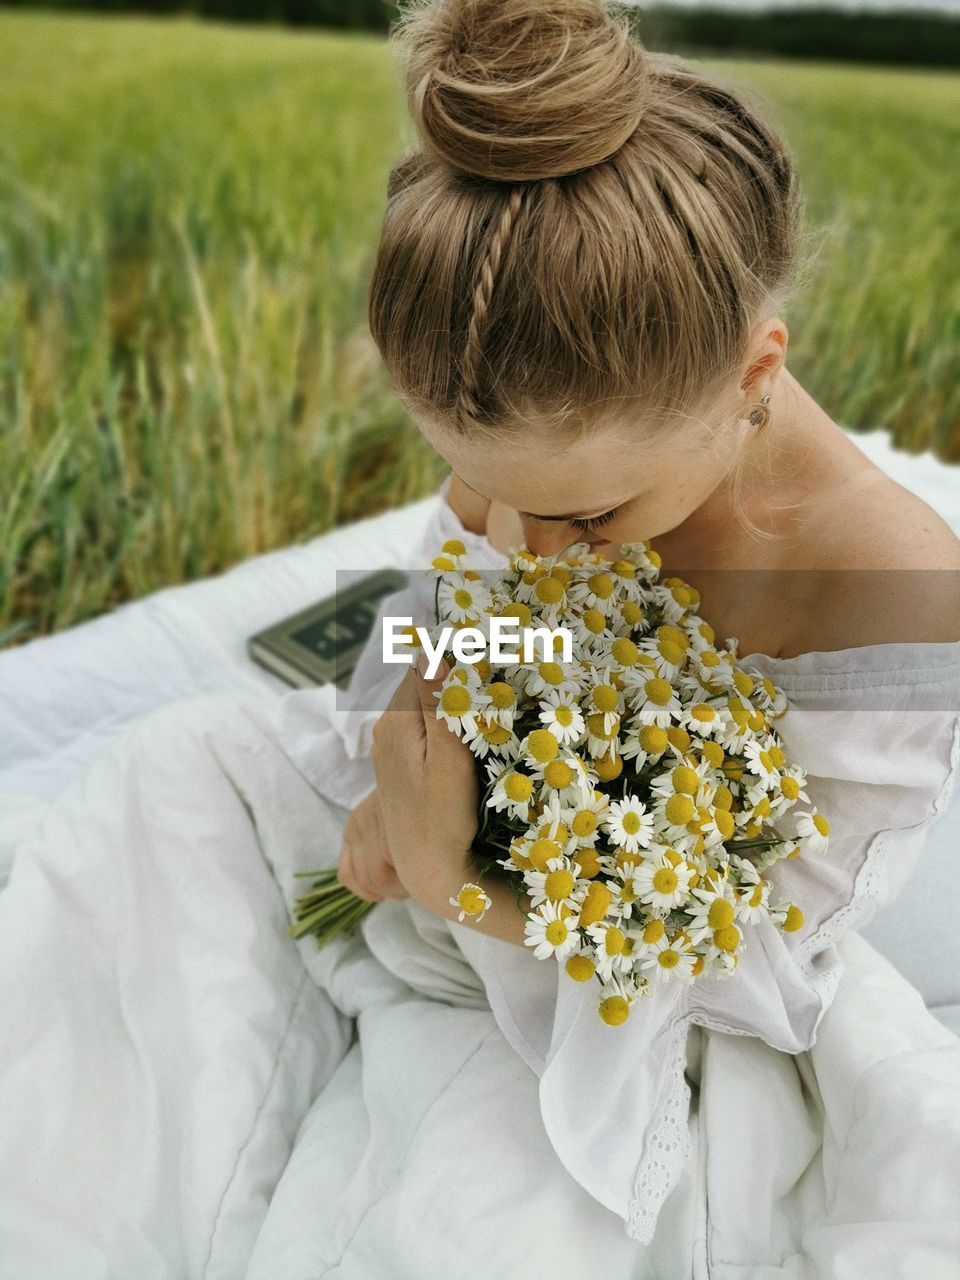 Close-up of bride holding bouquet sitting on grass outdoors